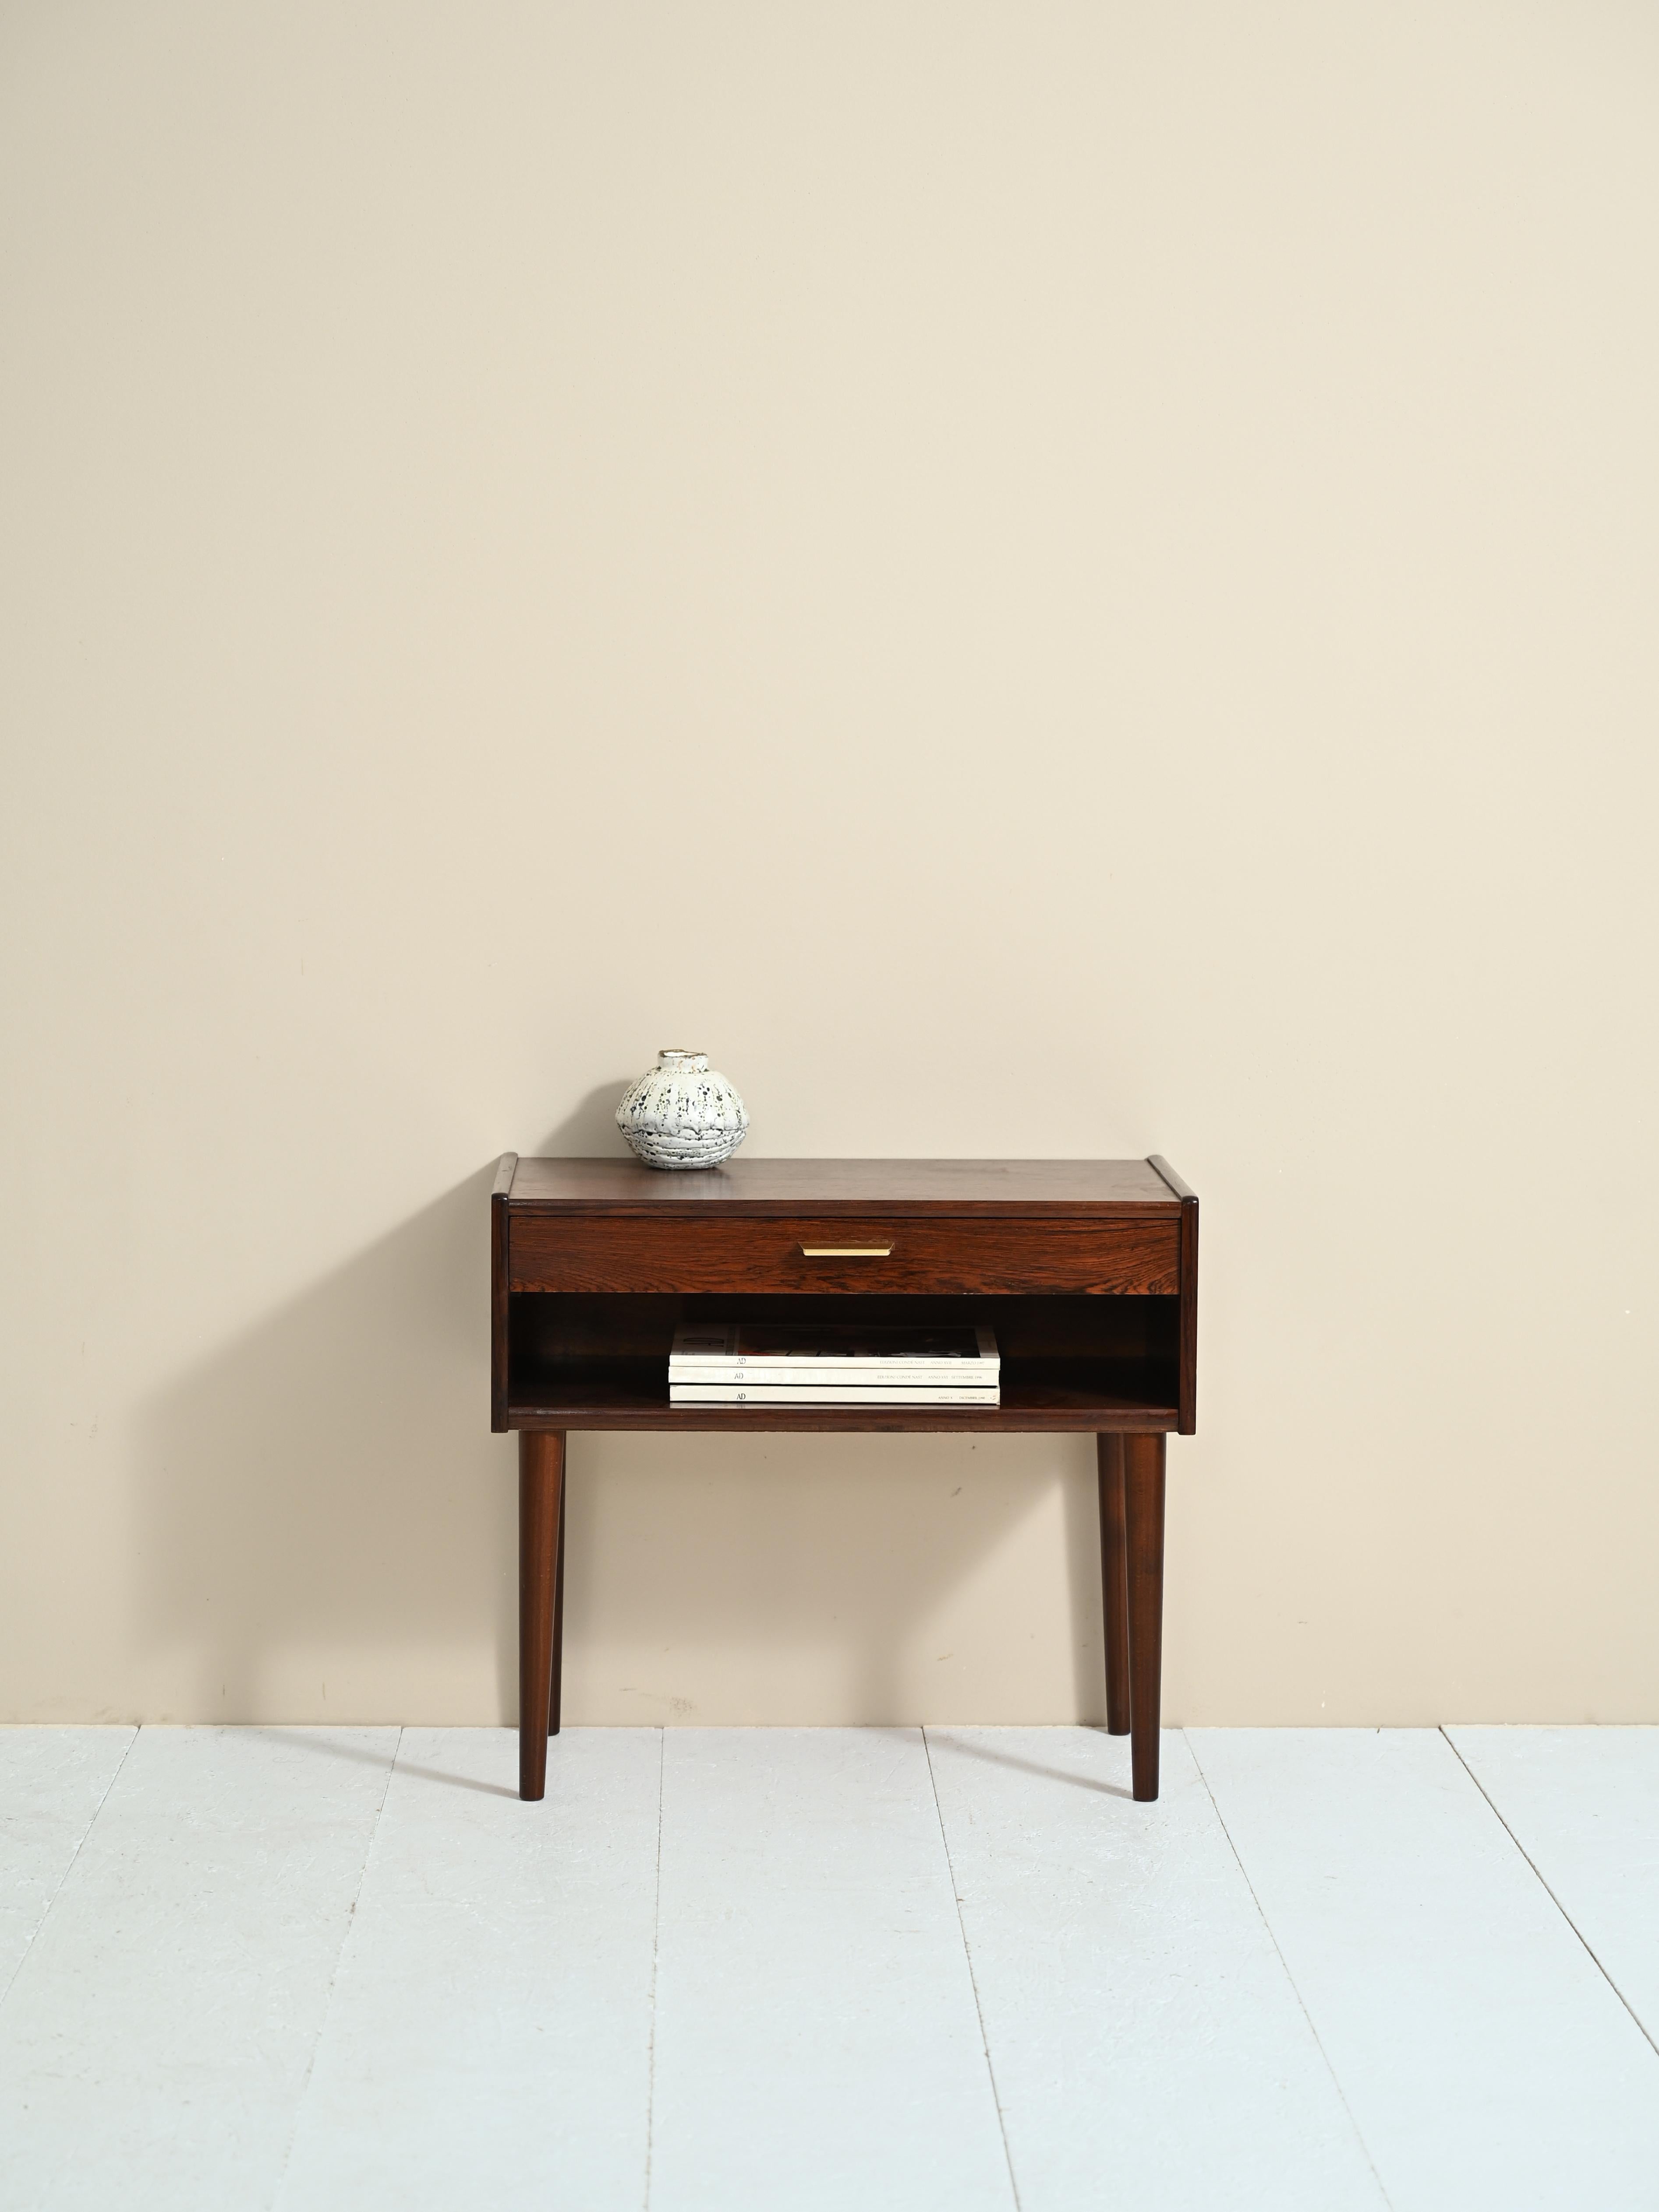 Scandinavian cabinet produced by Möblerfabrik in the 1960s.
There is a magazine rack top and a drawer with a gold metal handle. Tapered legs slender the frame. 
Deeply colored and markedly grained rosewood makes this bedside table a valuable and